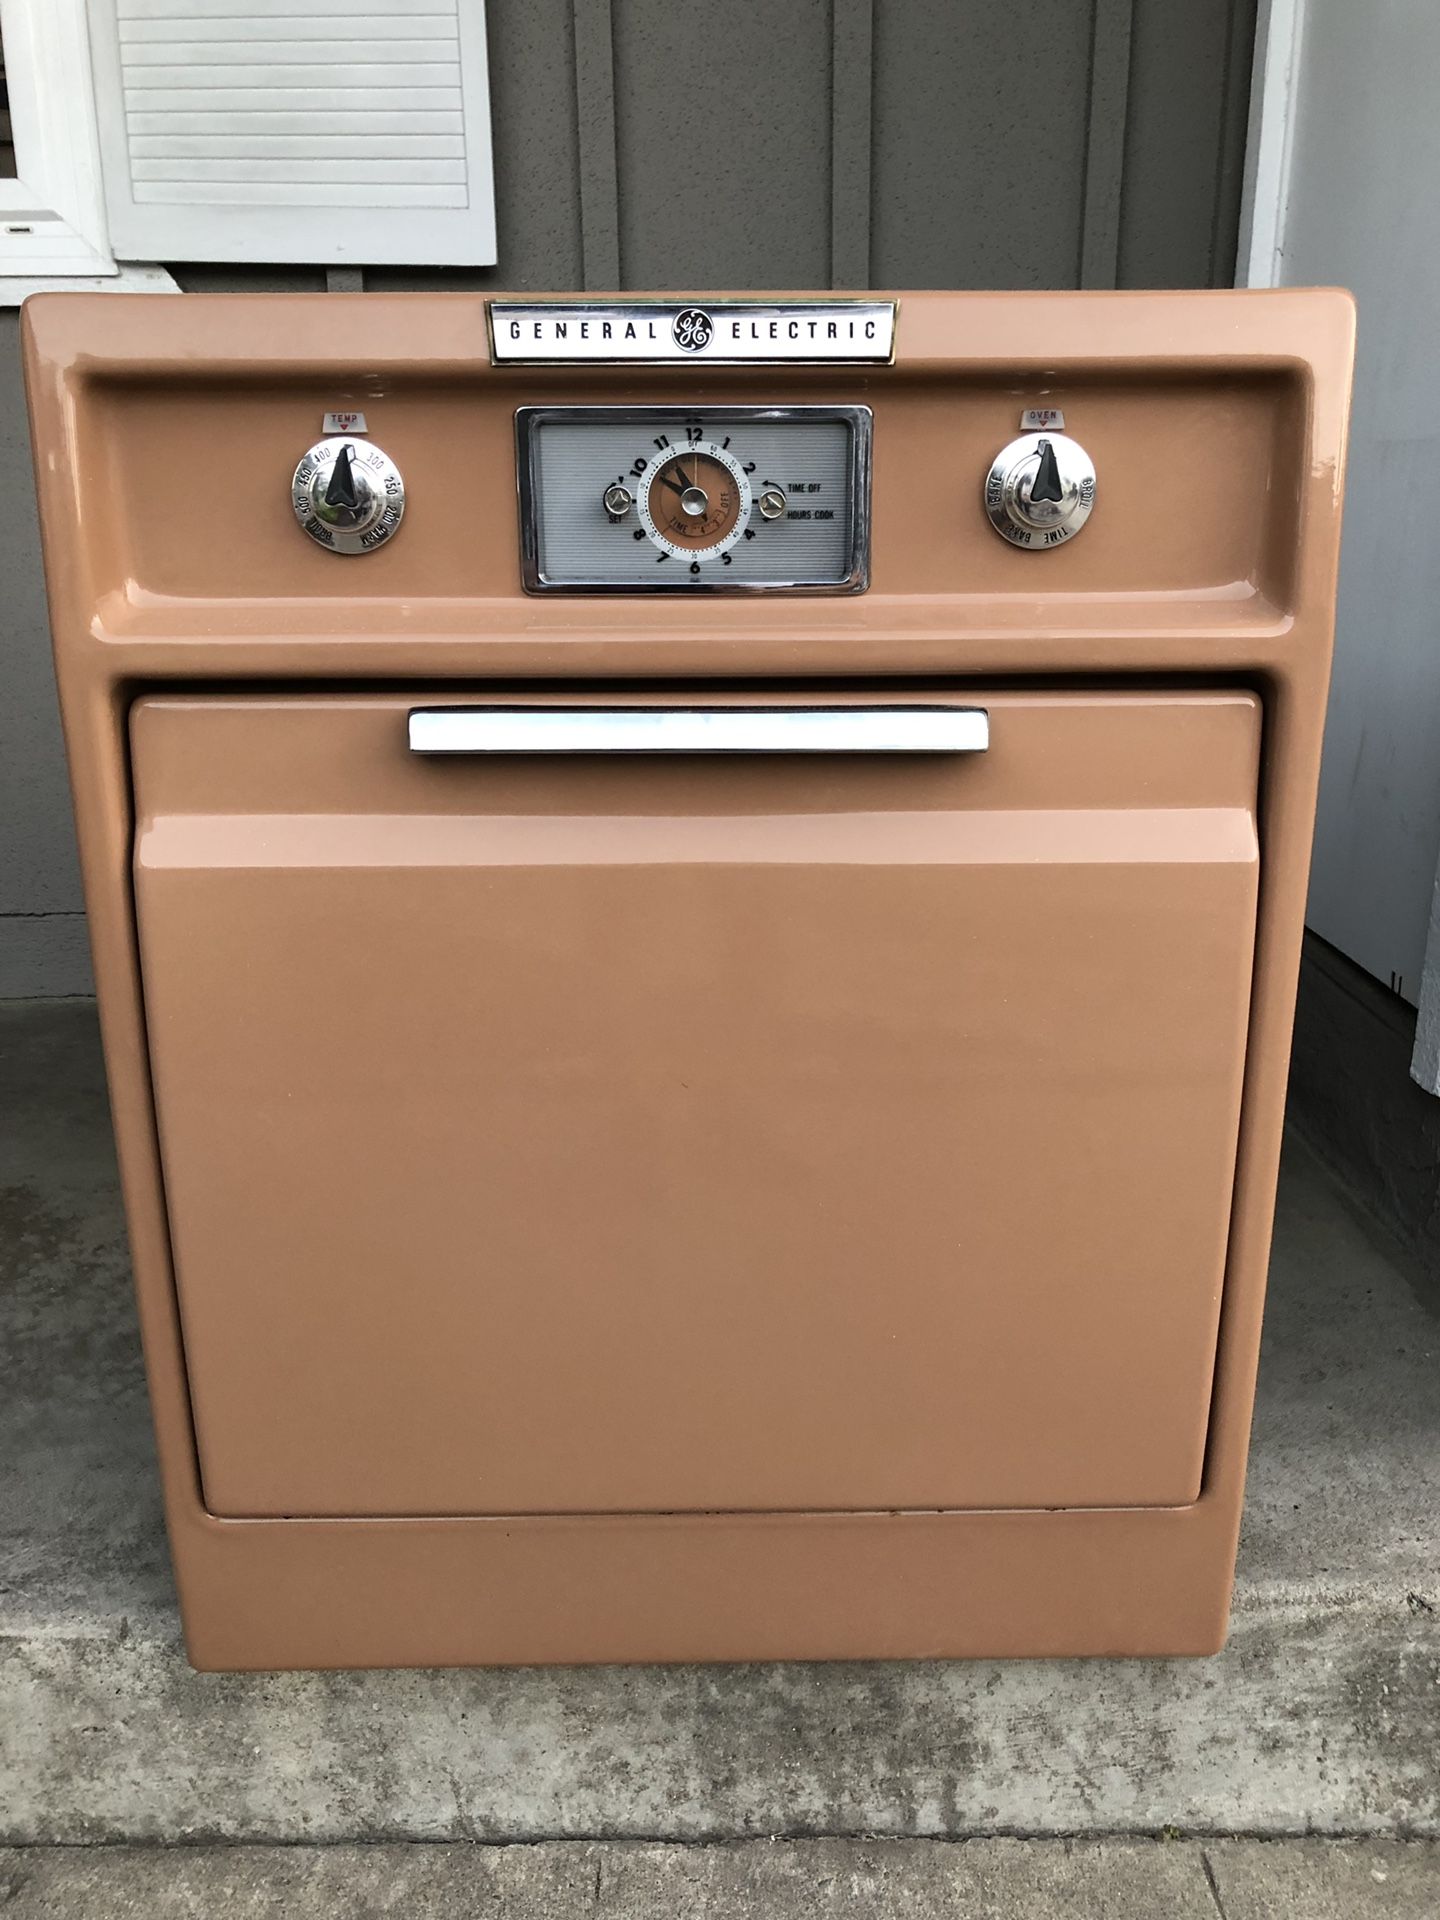 Classic 1950’s GE electric oven